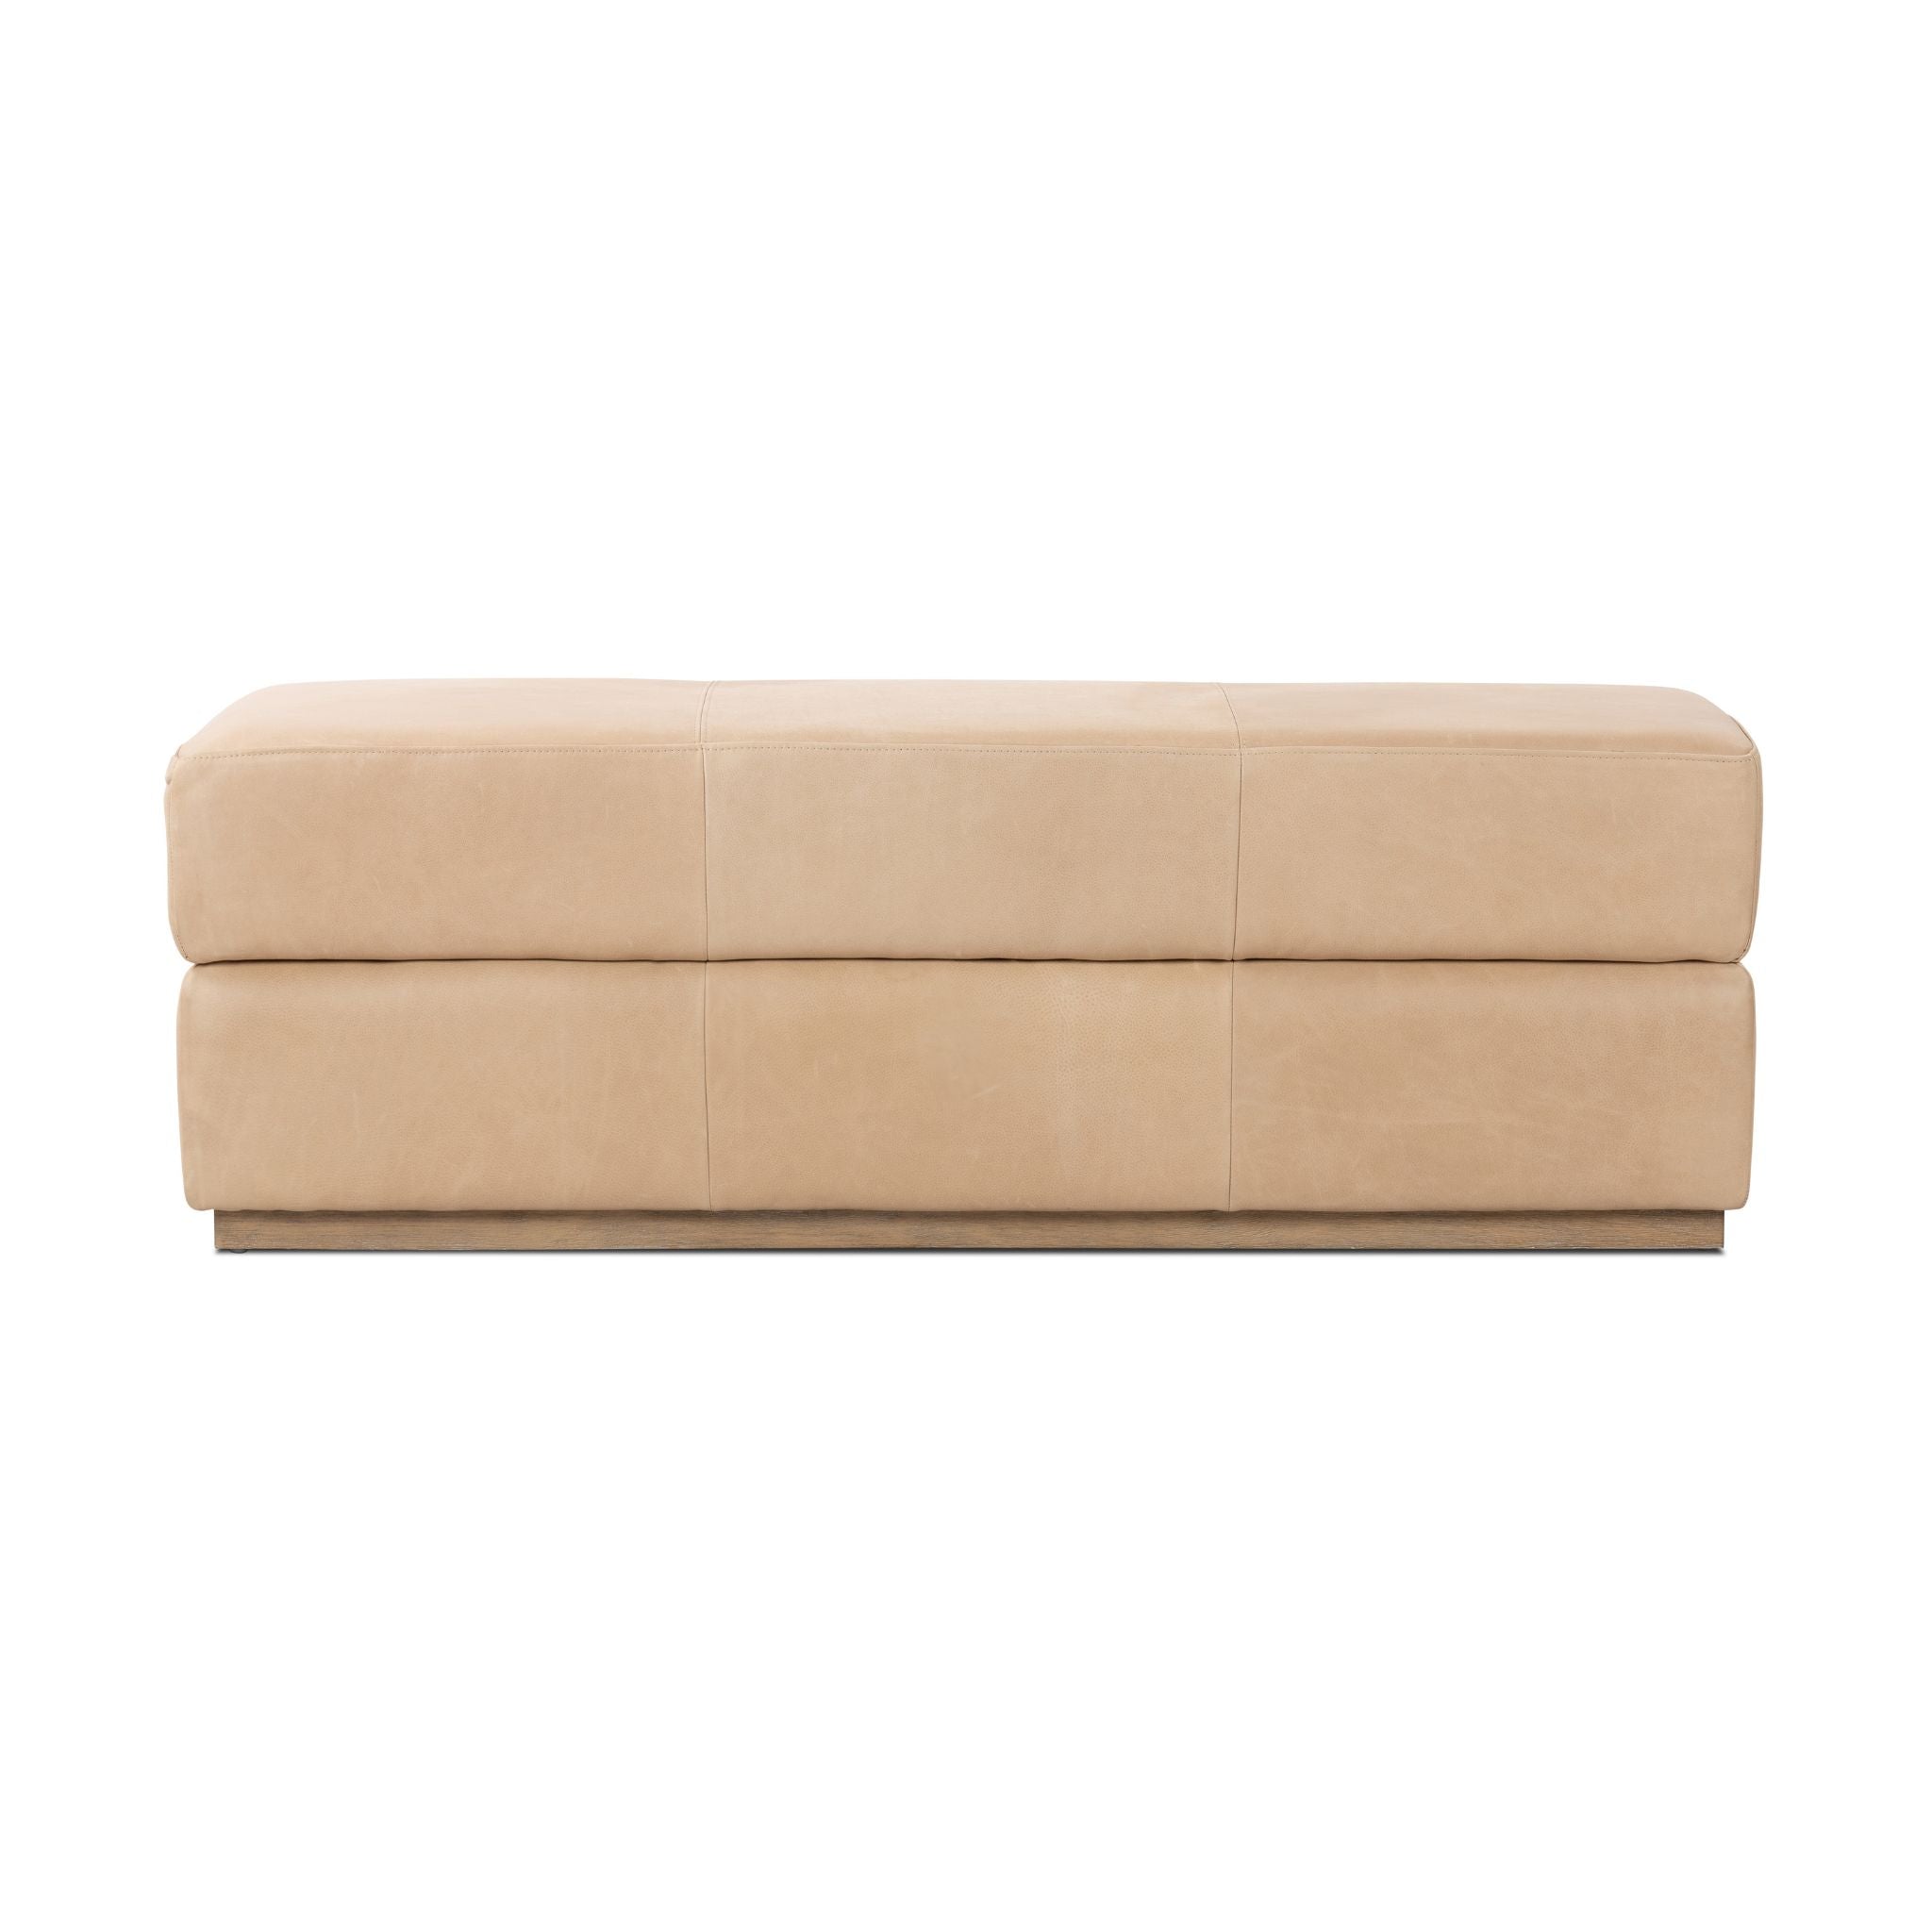 MAXIMO ACCENT BENCH-PALERMO NUDE